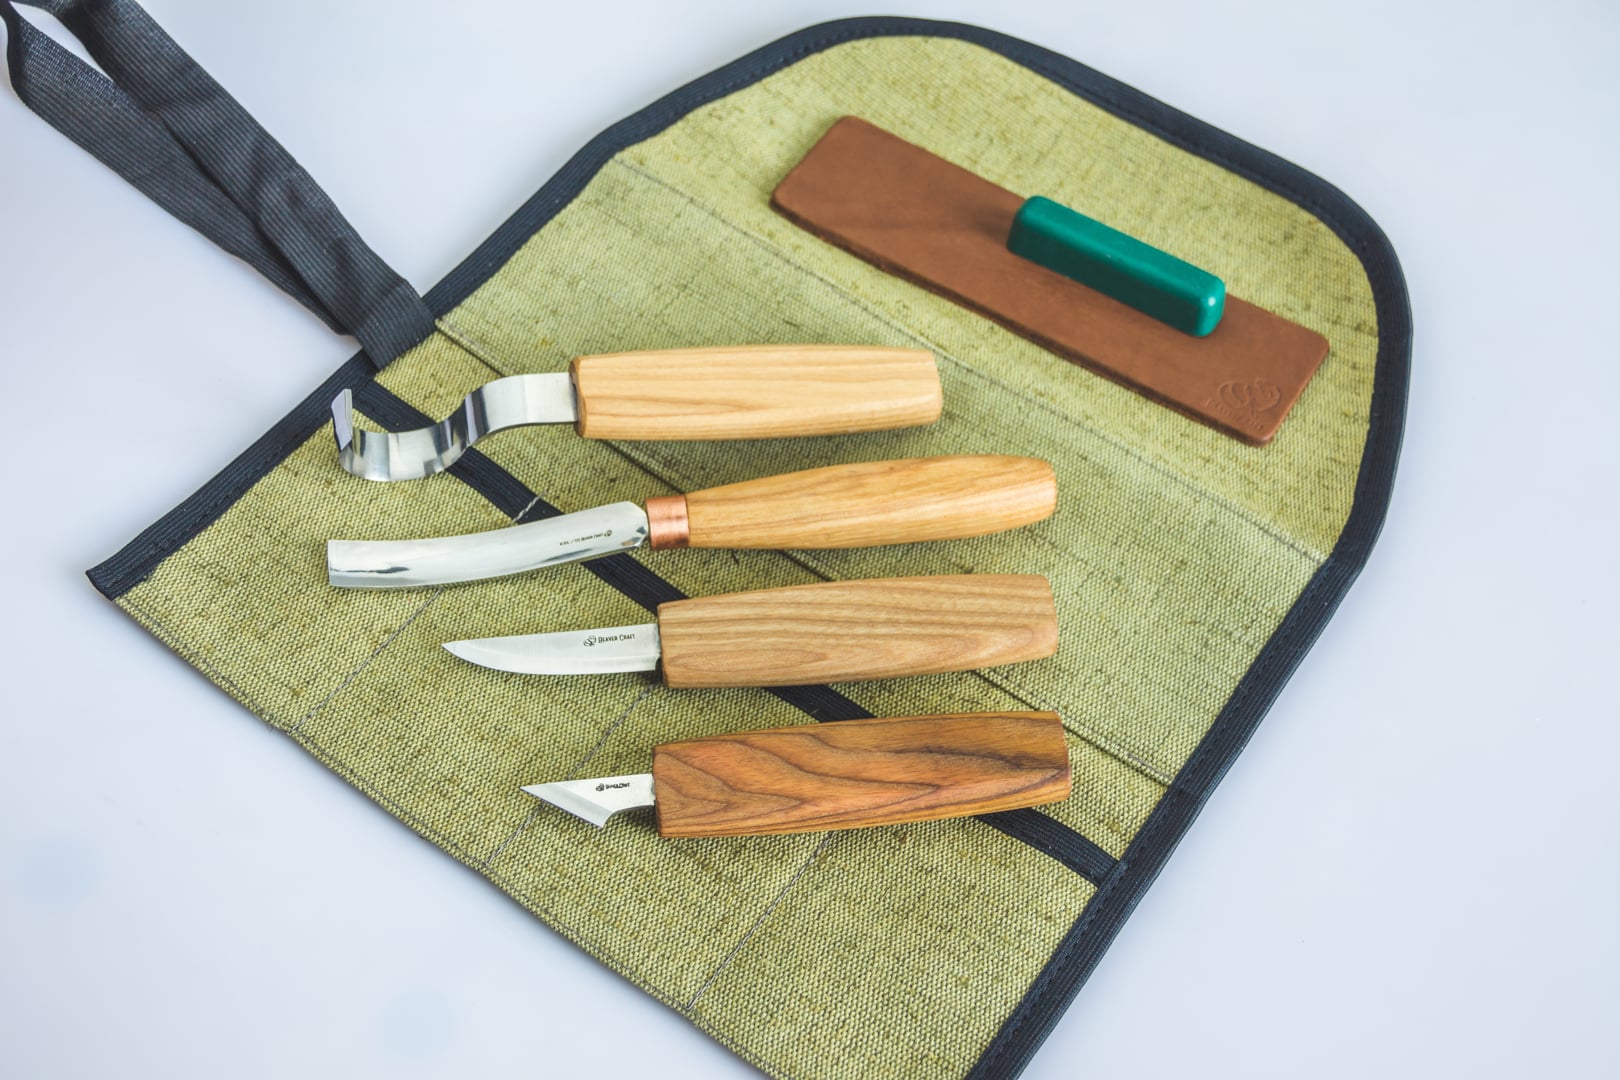 BeaverCraft Spoon Carving Set of 4 S19 Book, wood carving set with wooden  storage book